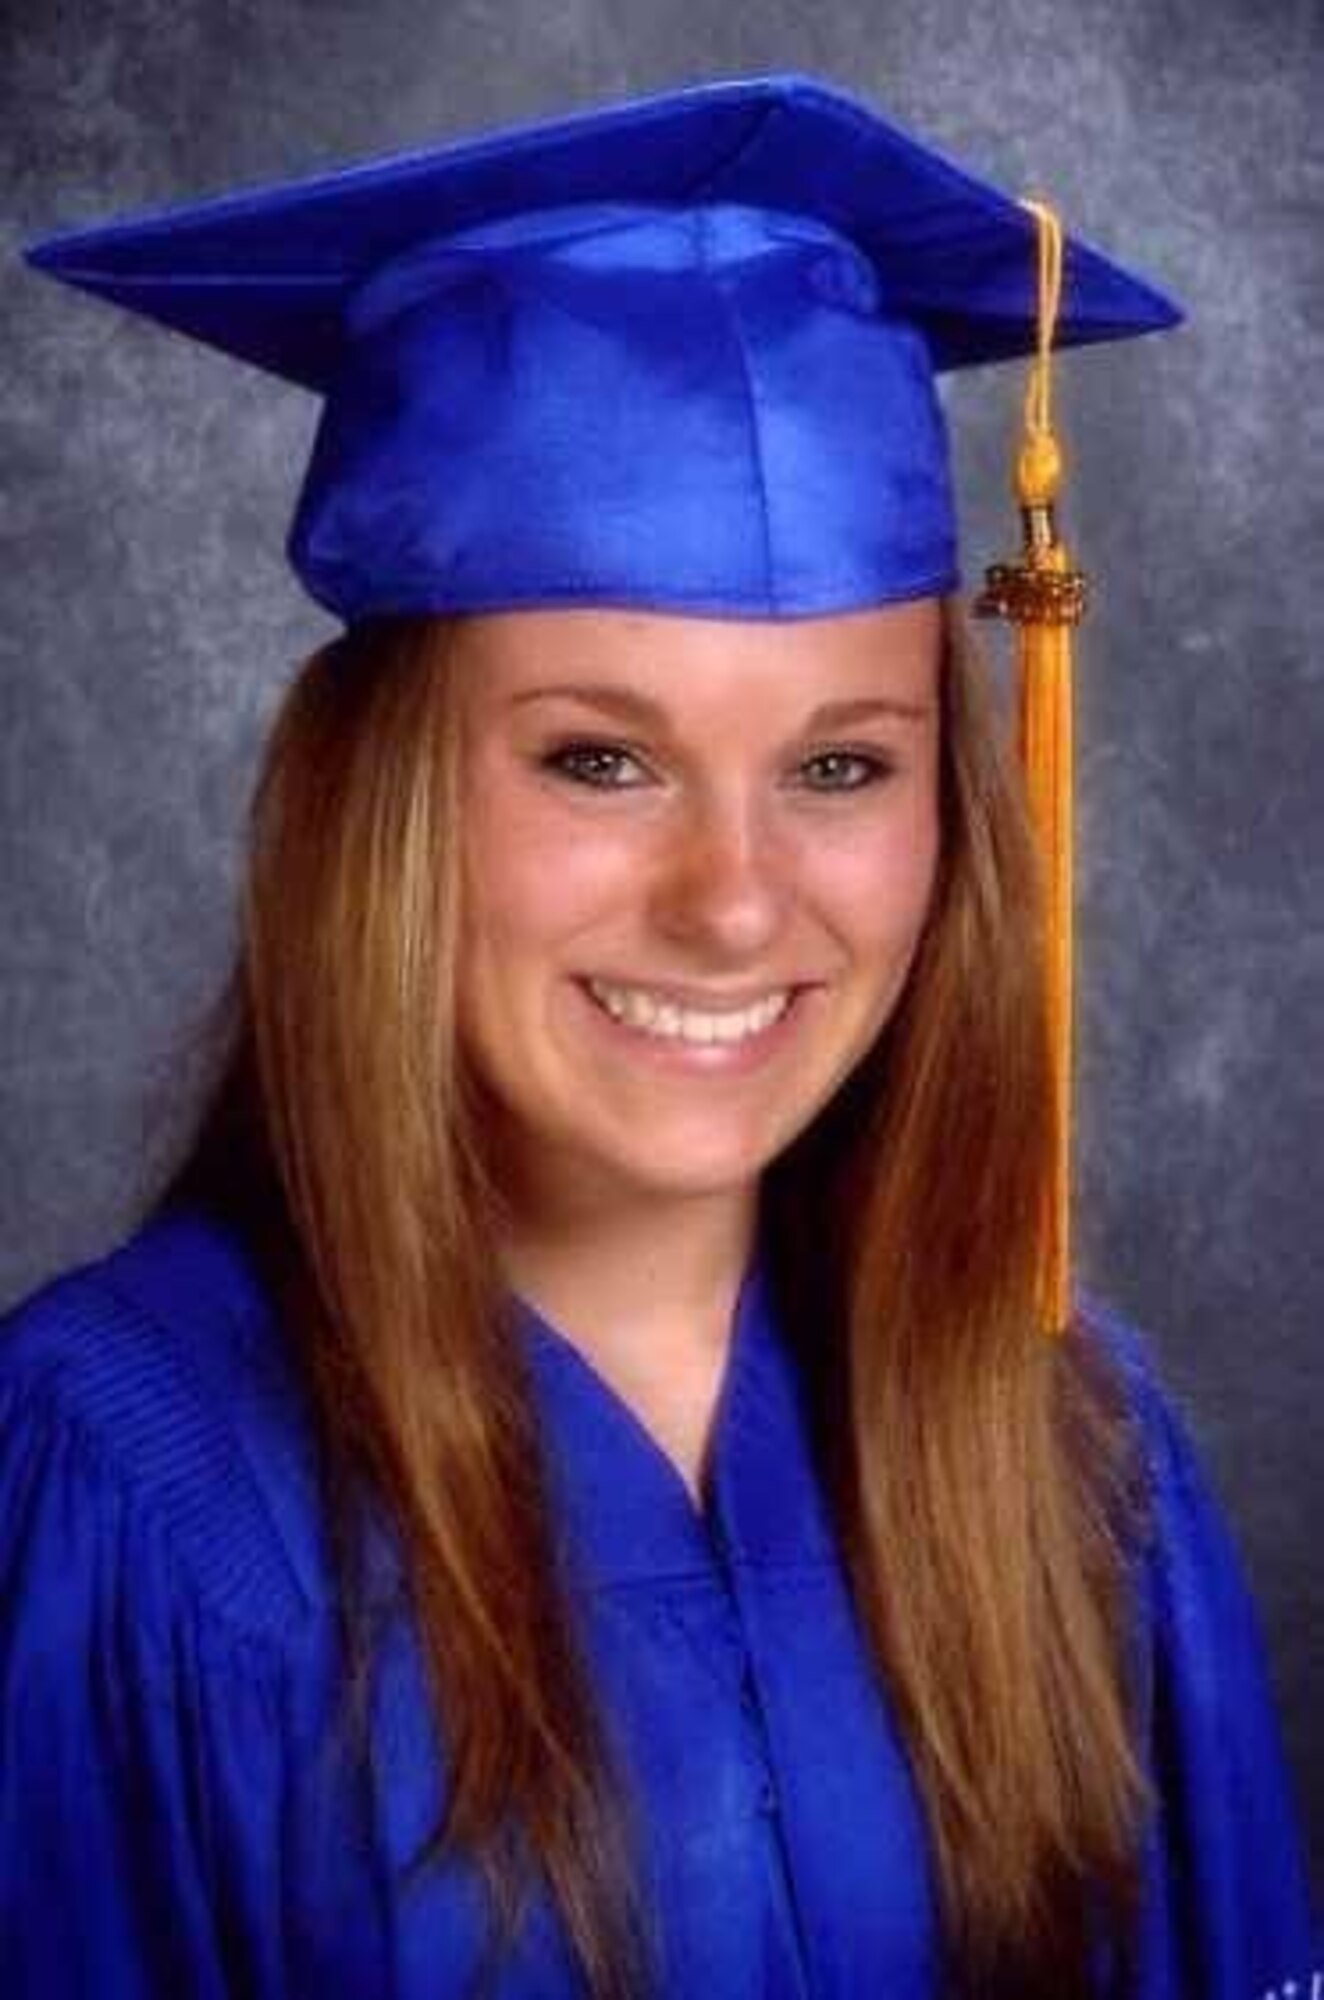 Chelsea Rae Bowen, 15, took her own life back on March 16, 2009.